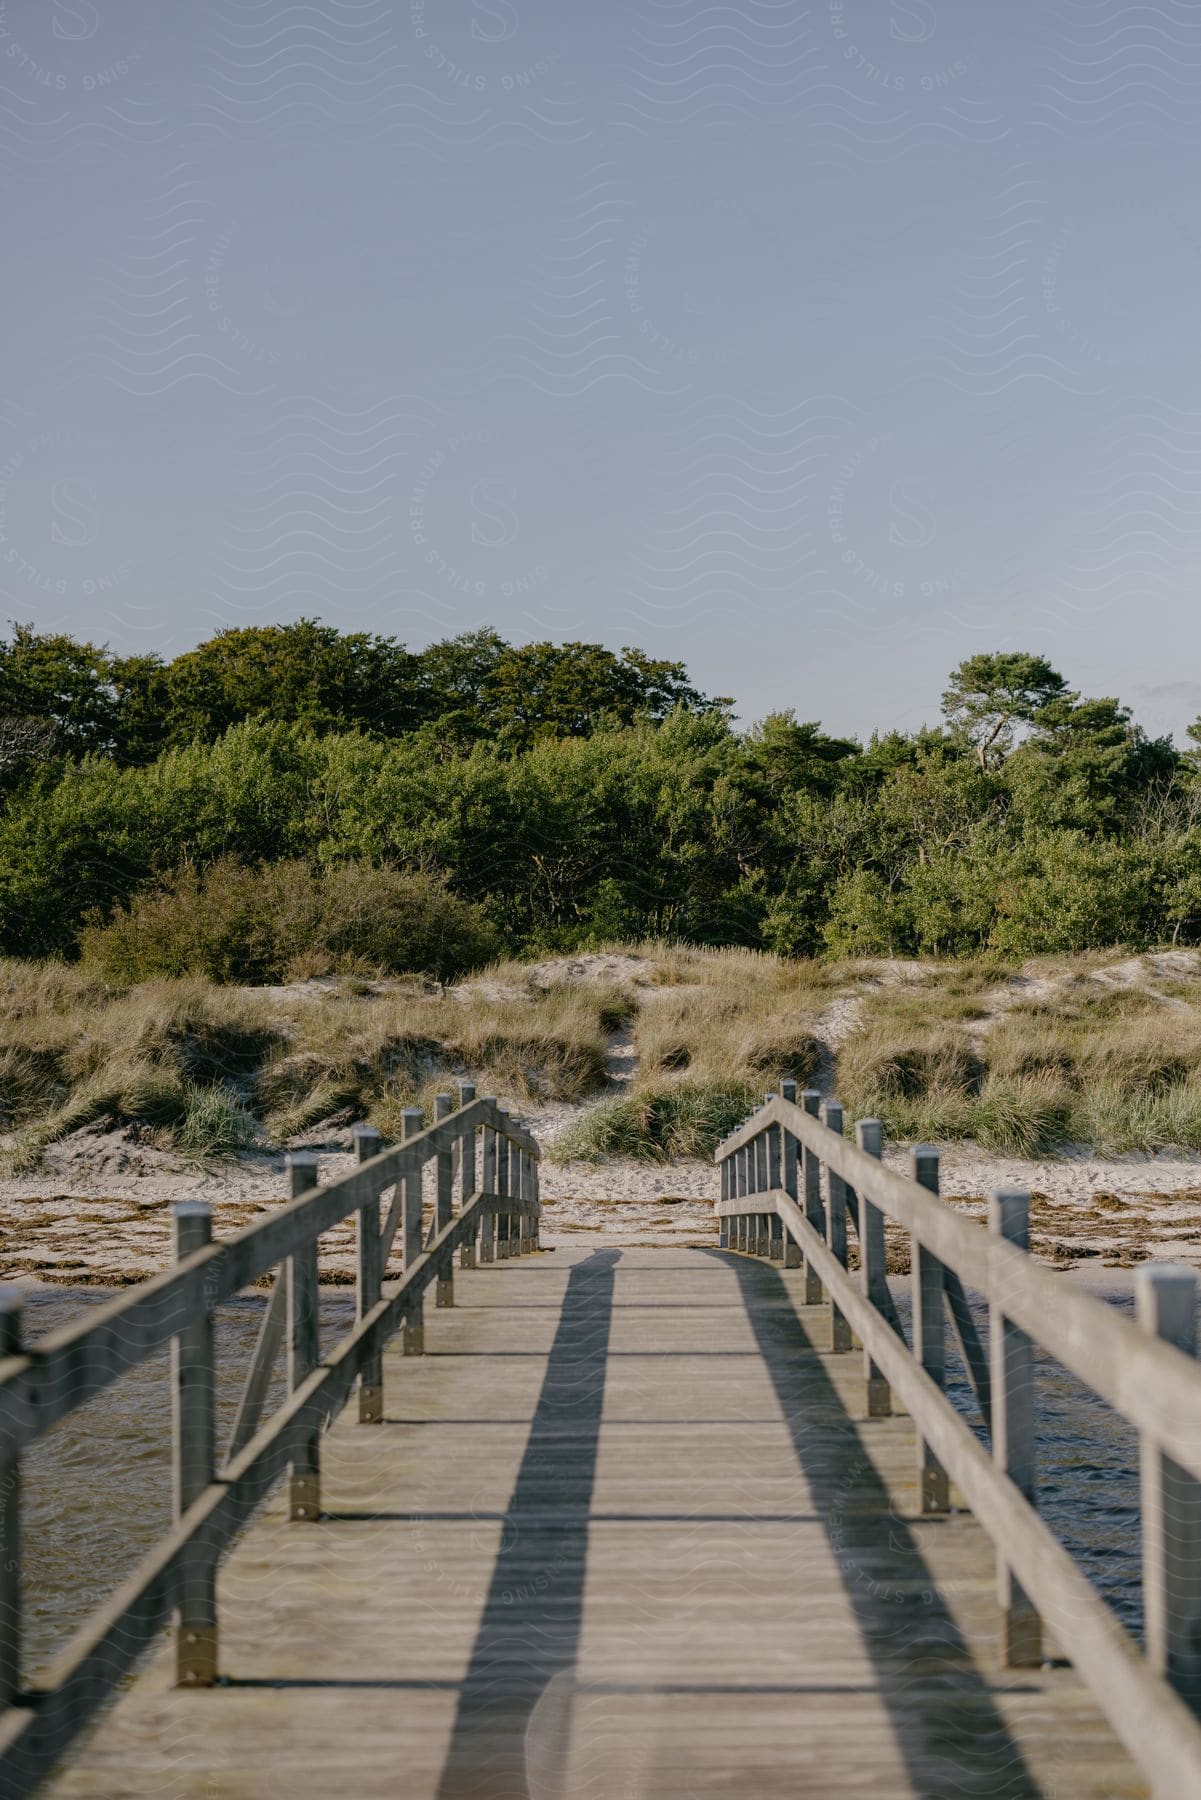 The sun shines on a narrow wooden bridge over water that leads to a sand and brush covered shore